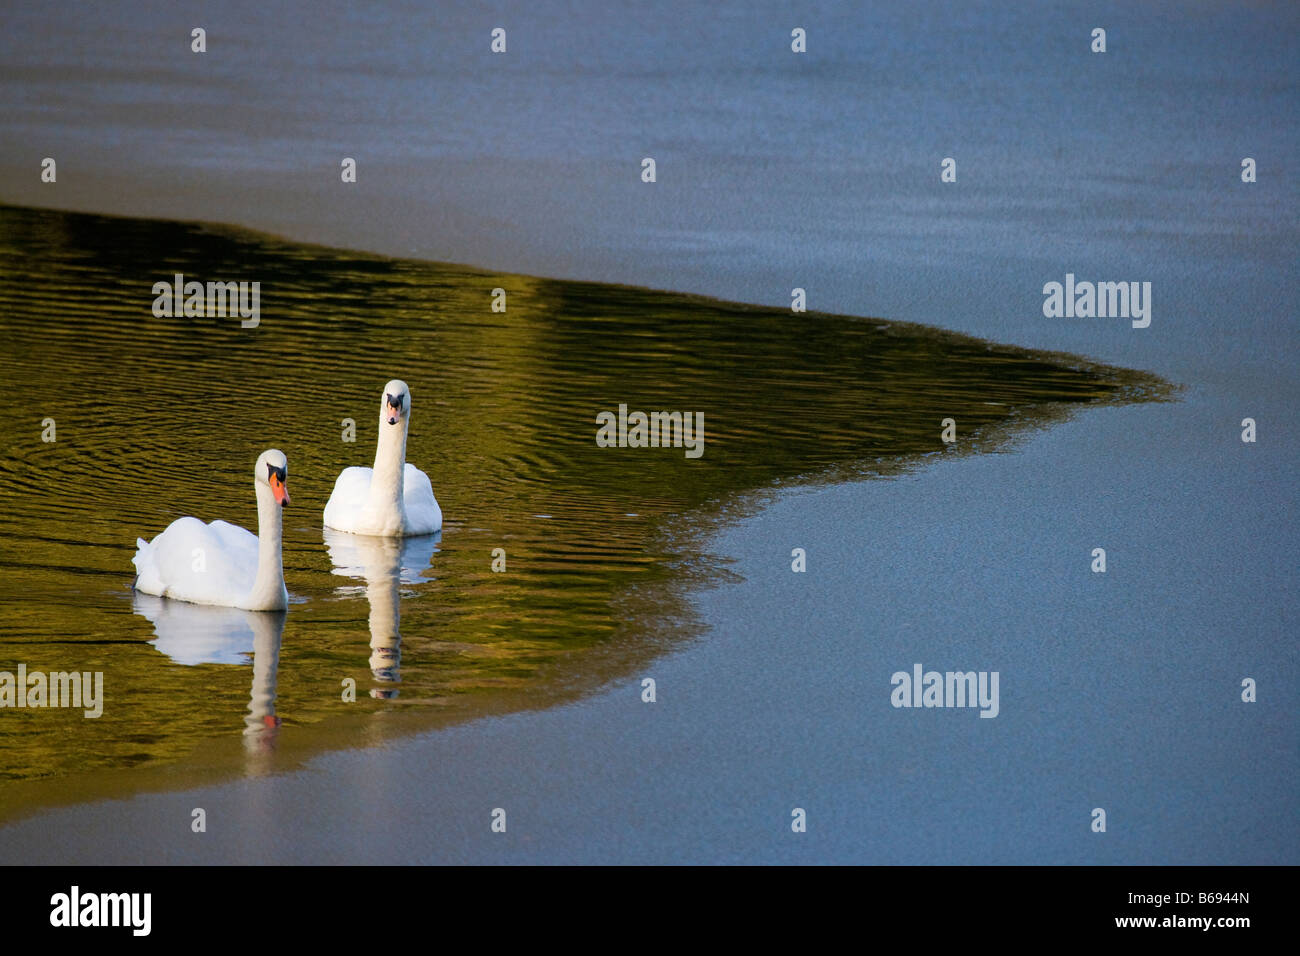 Two Mute swans in water with colourful reflections Stock Photo